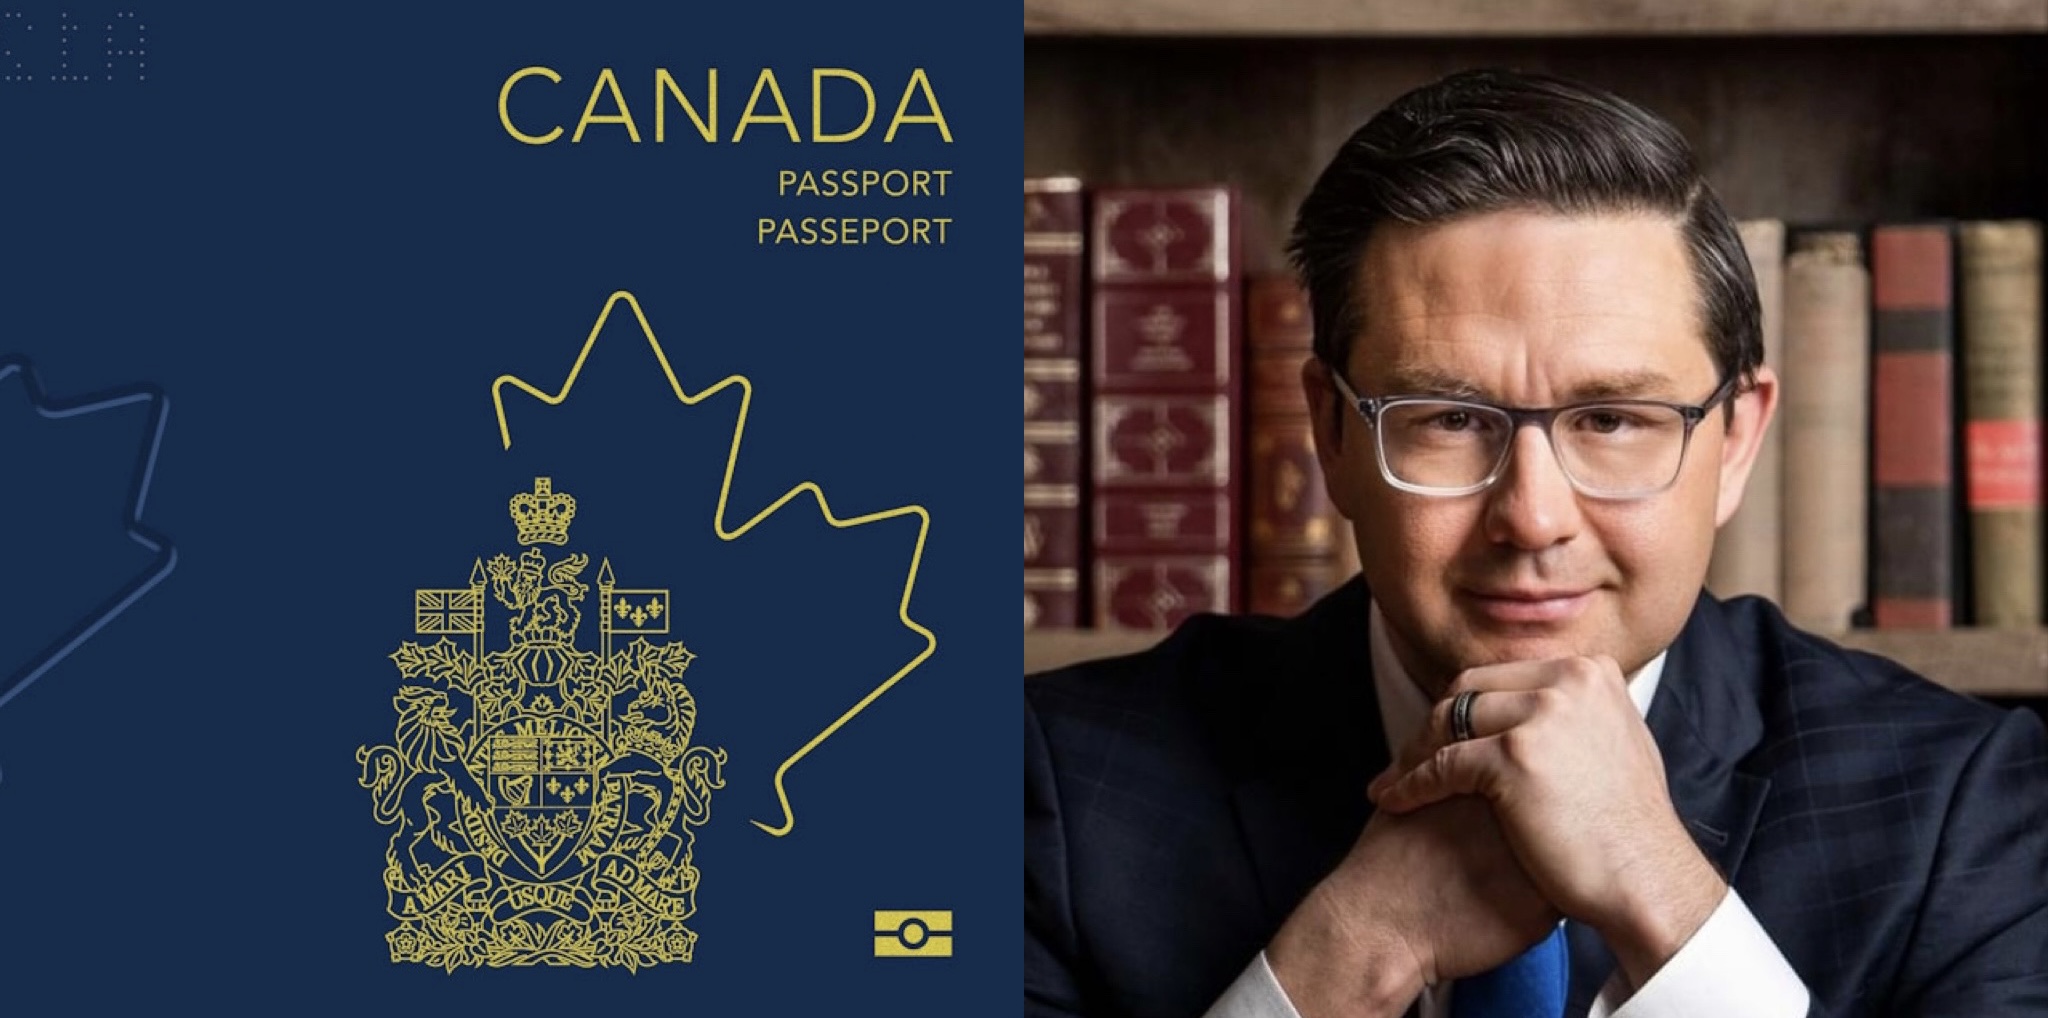 Manufactured outrage over the Canadian passport redesign is a nothingburger